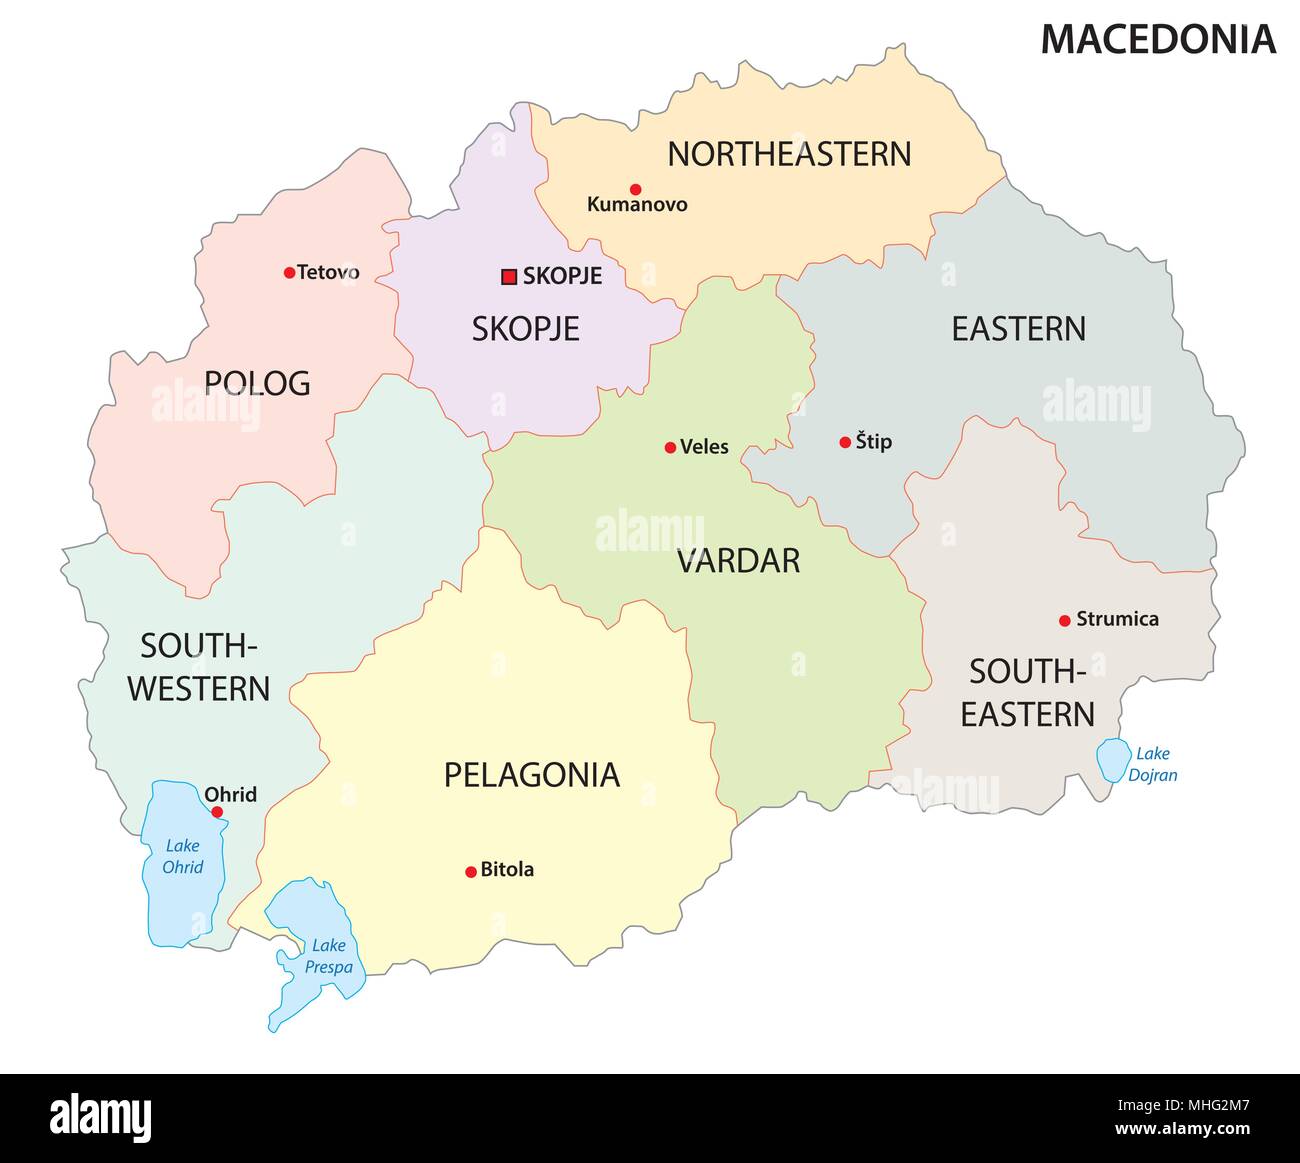 macedonia simple administrative and political vector map Stock Vector